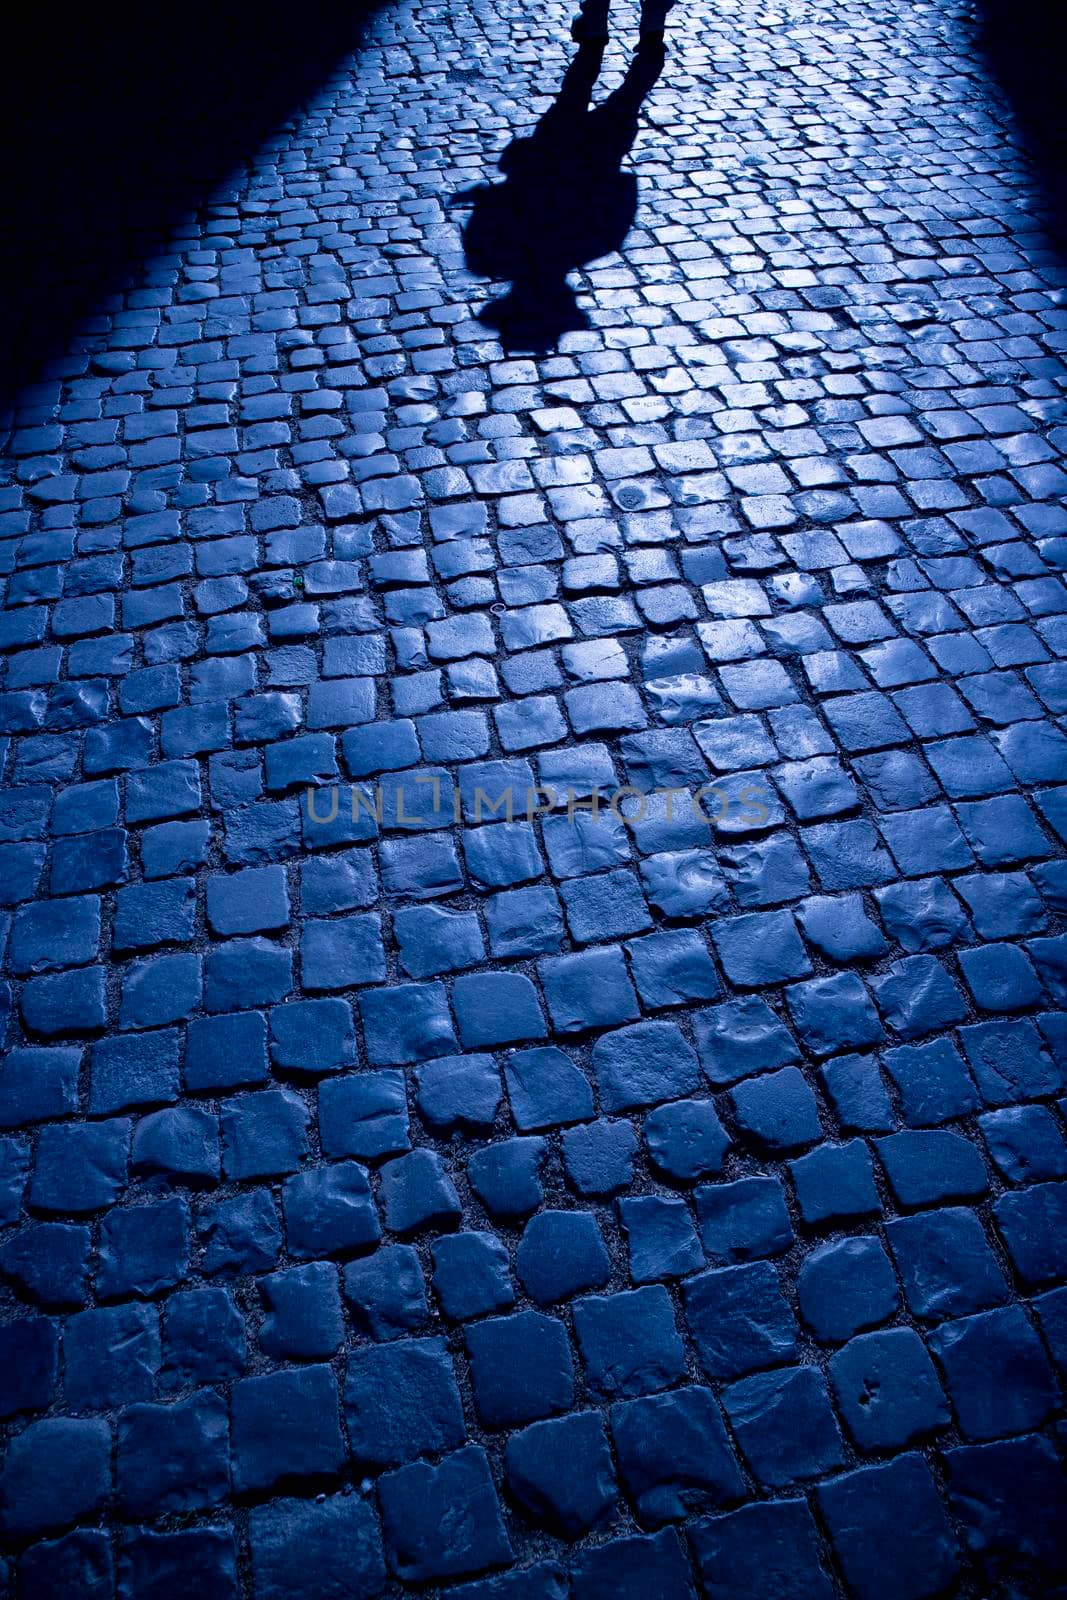 Shadows projected into the street by fotografiche.eu